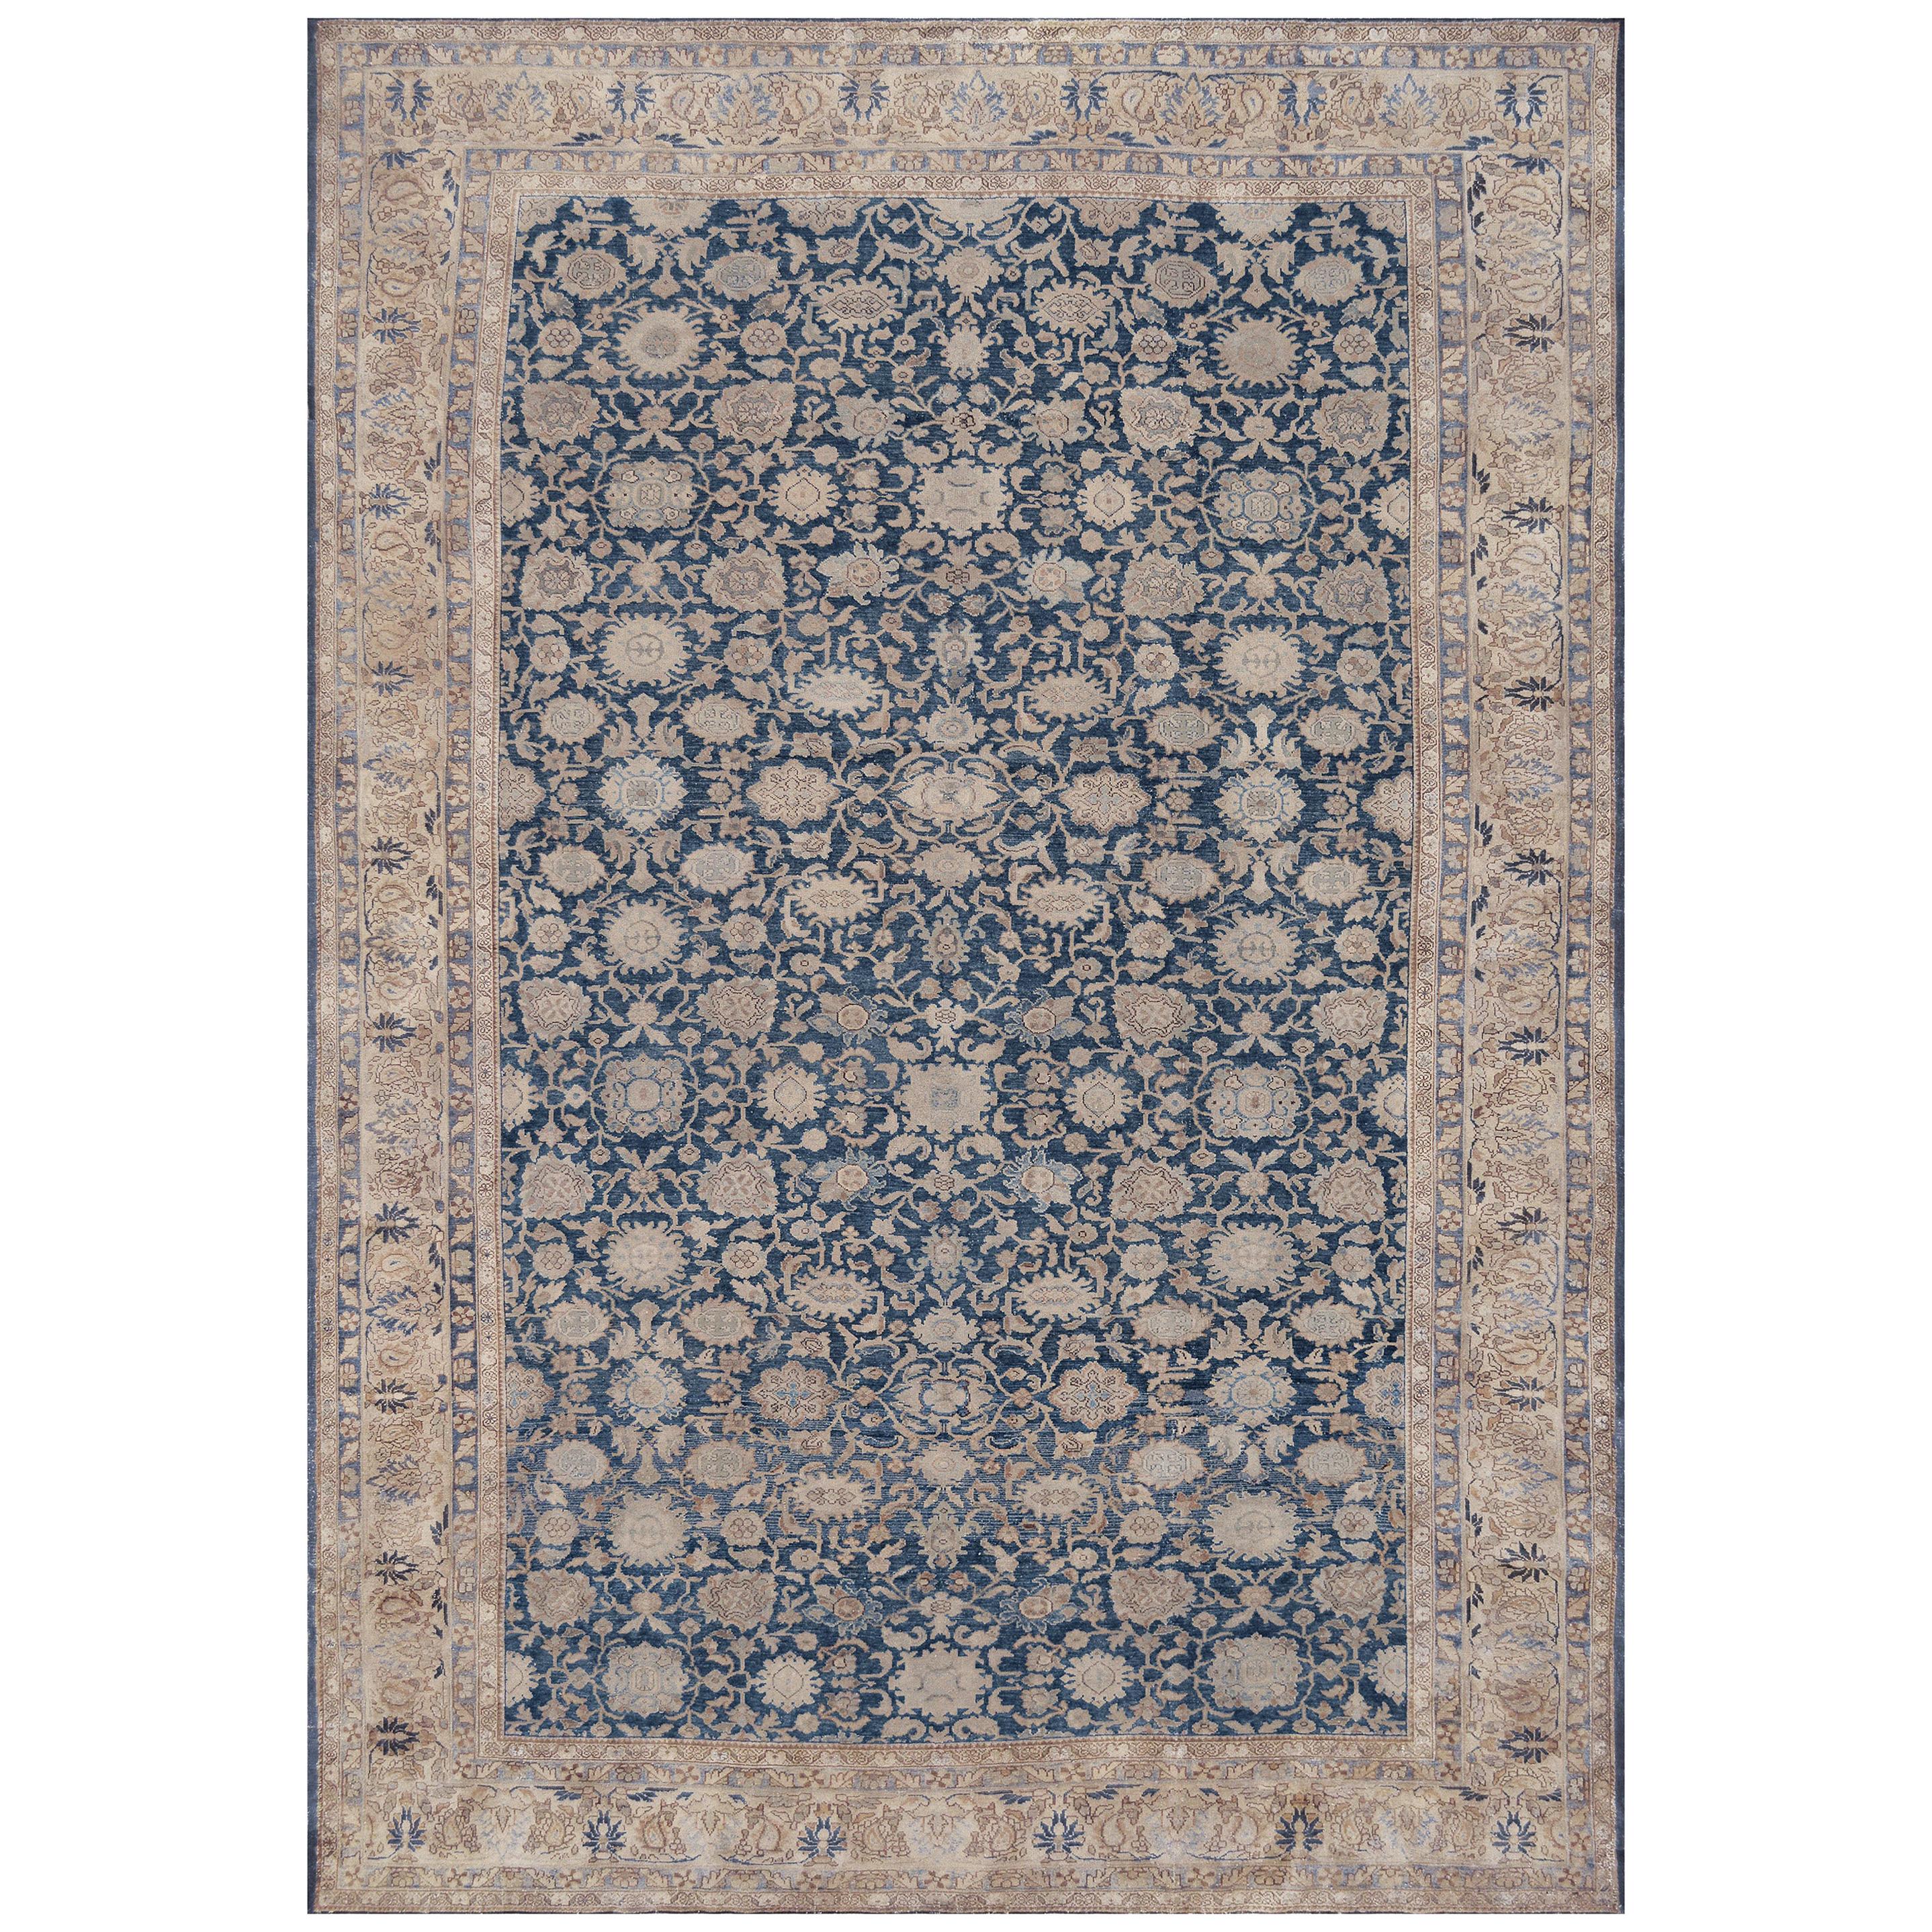 Handwoven Wool Persian Malayer Antique Rug